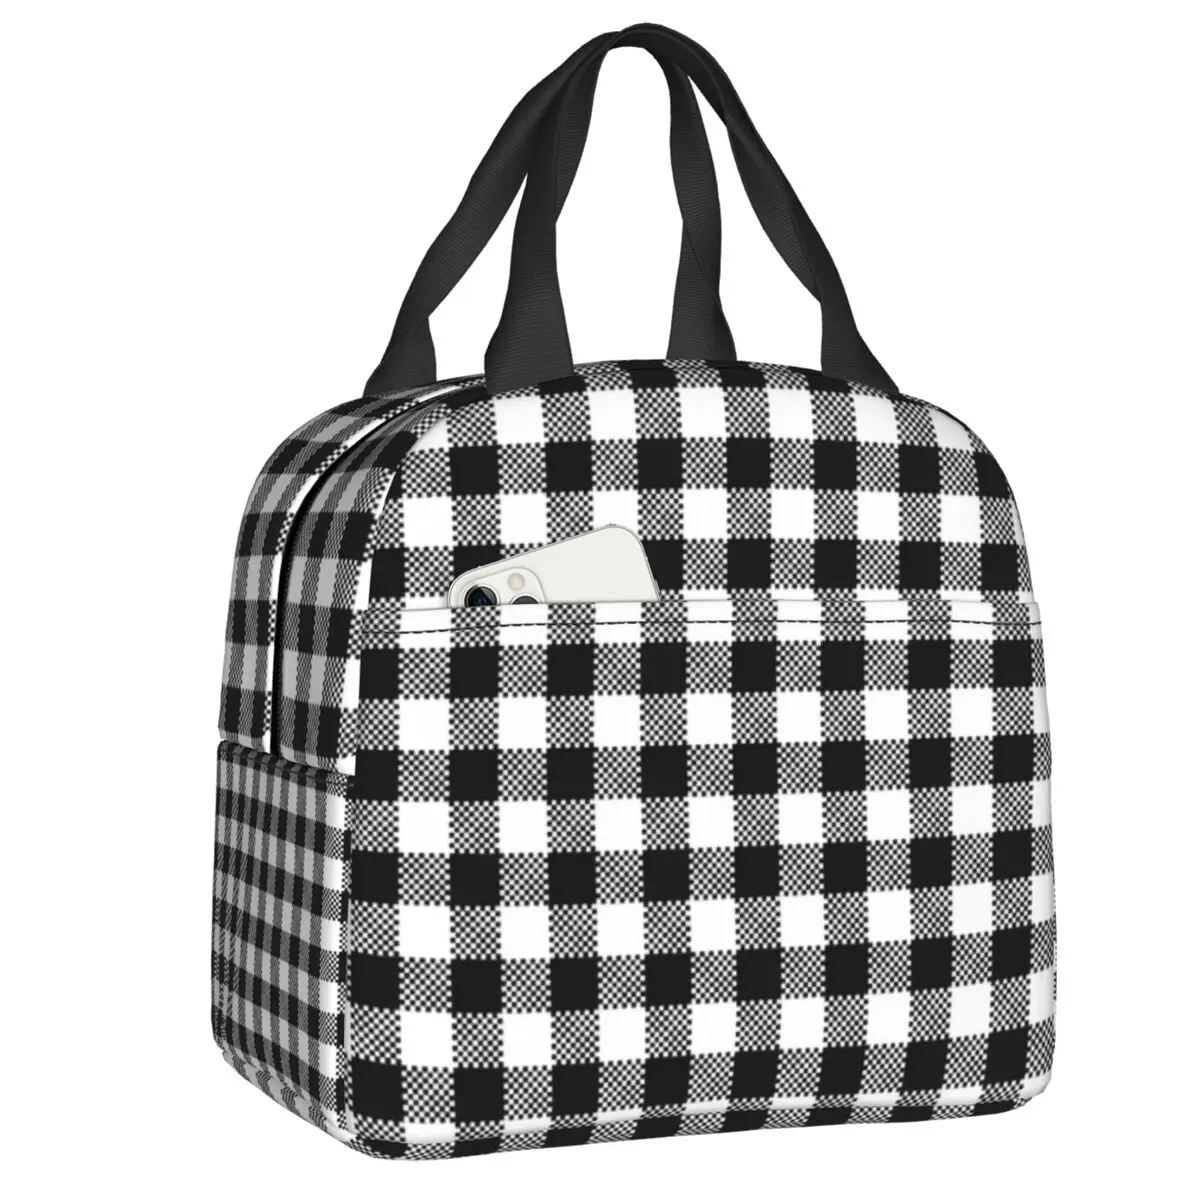 

Black And White Gingham Lunch Box Women Geometric Checkered Plaid Cooler Thermal Food Insulated Lunch Bag For Work Picnic Bags